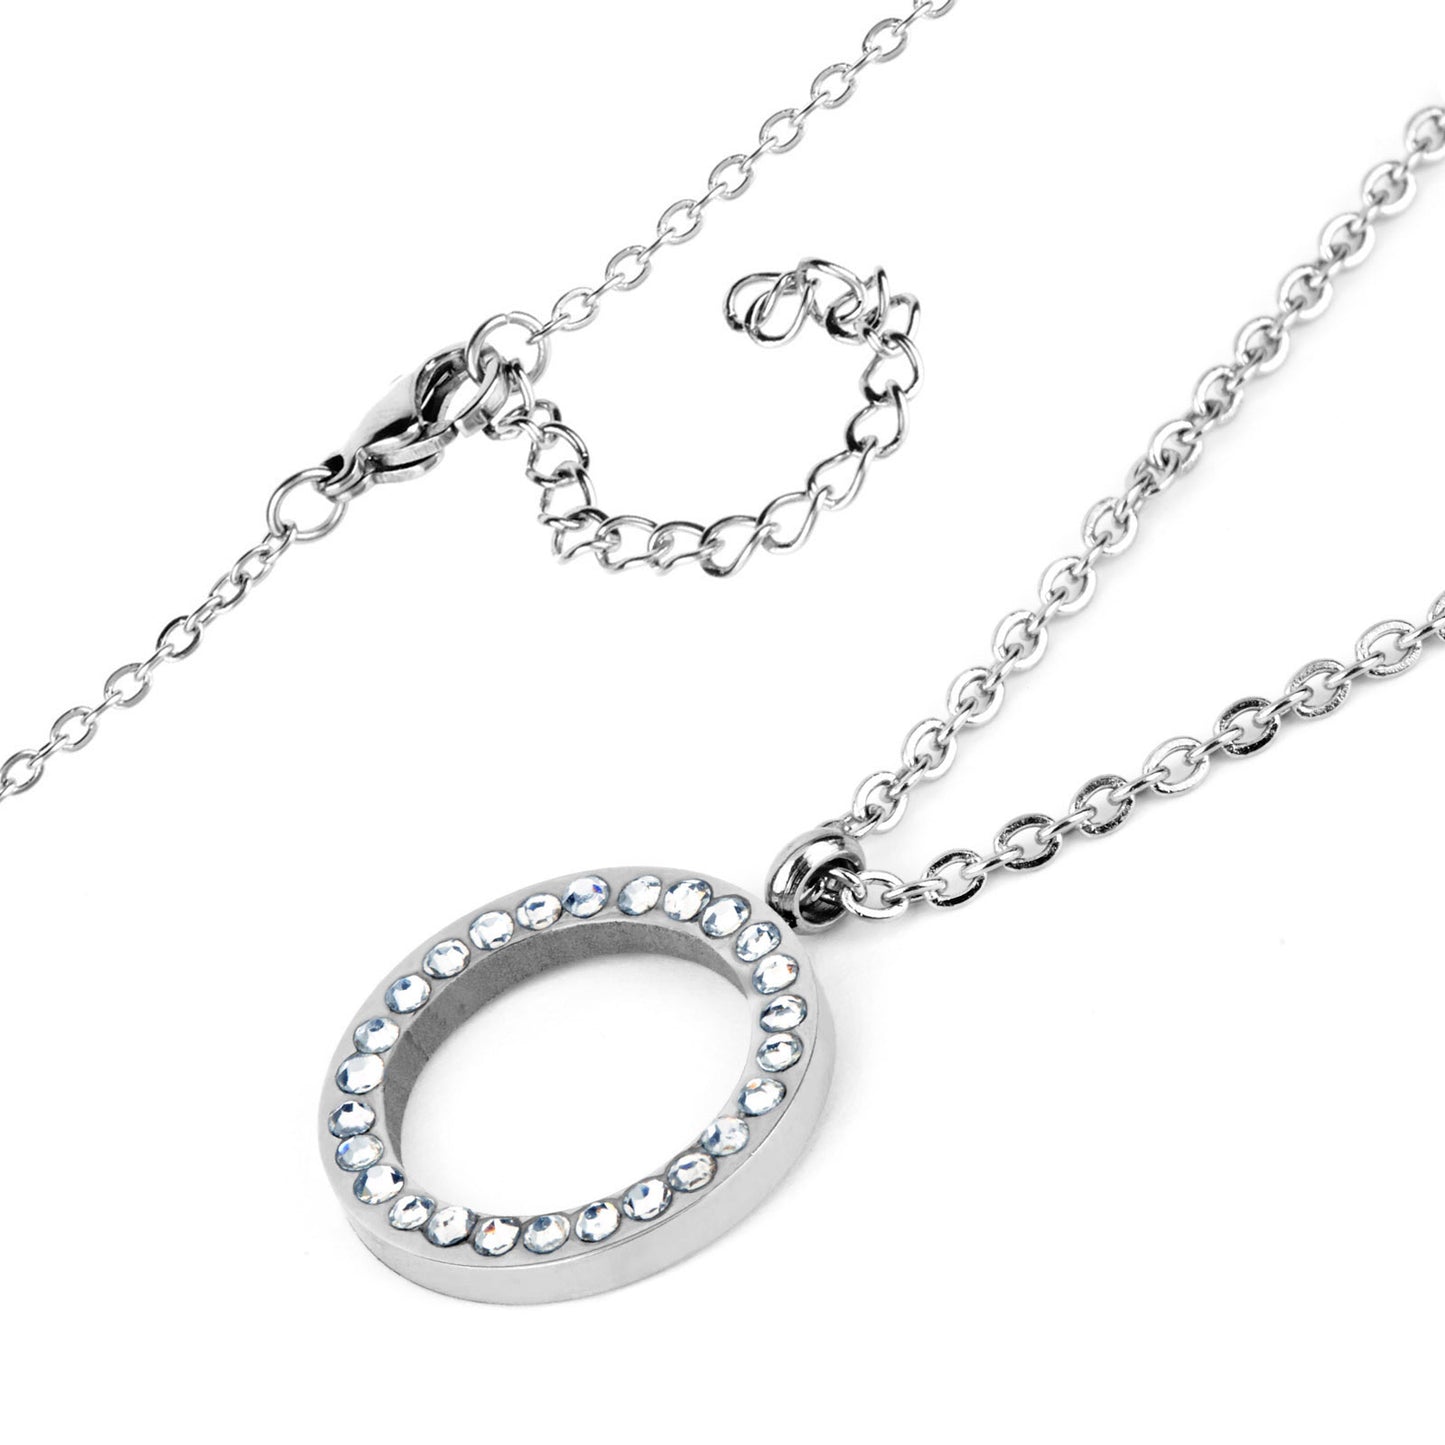 ELYA Cubic Zirconia Open Circle Stainless Steel Pendant Necklace - 16"